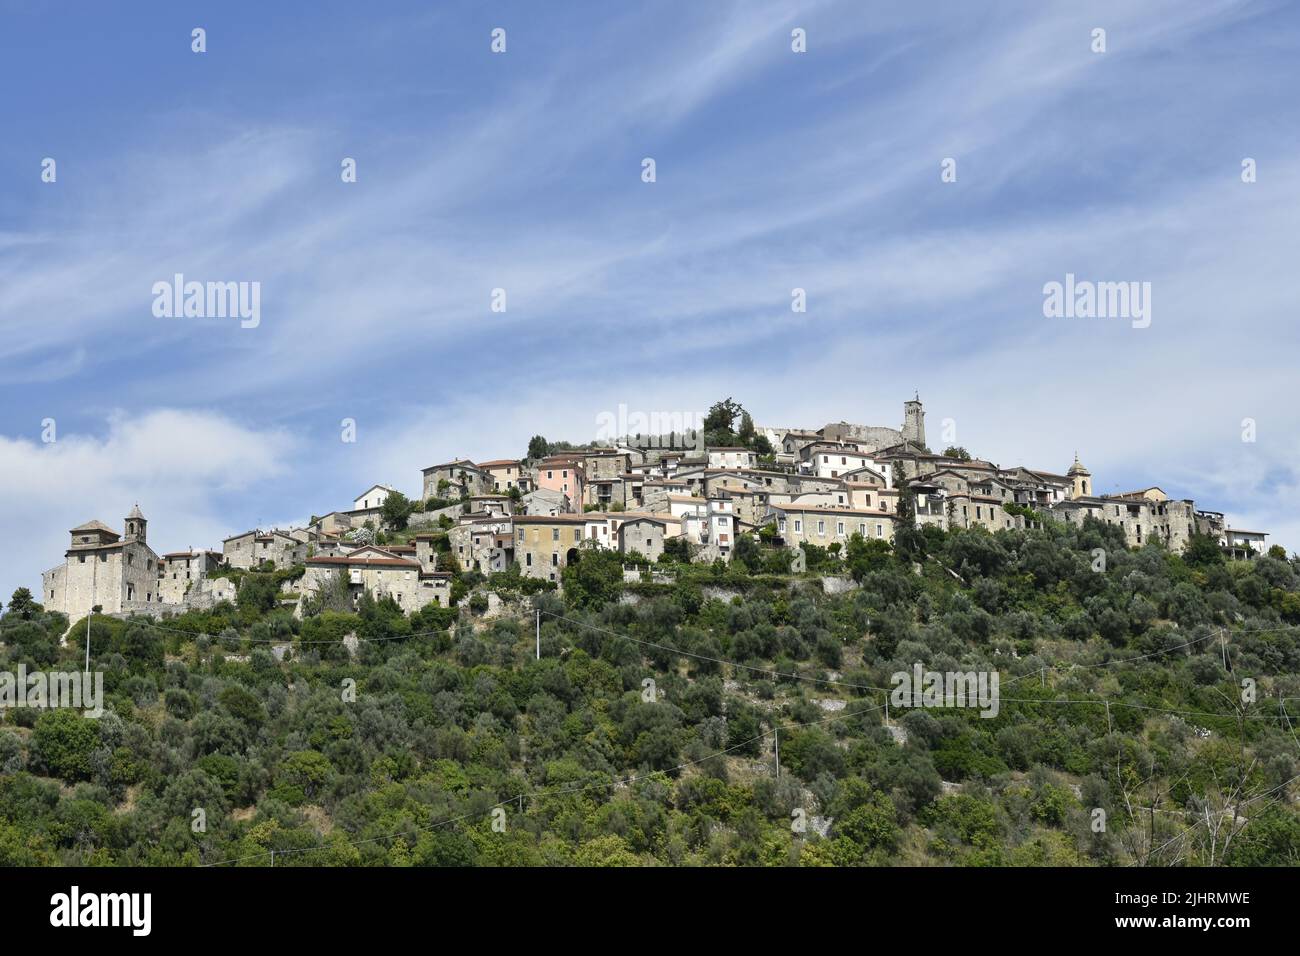 A beautiful view of Fontana Liri village on a green hill with trees under a  blue sky Stock Photo - Alamy